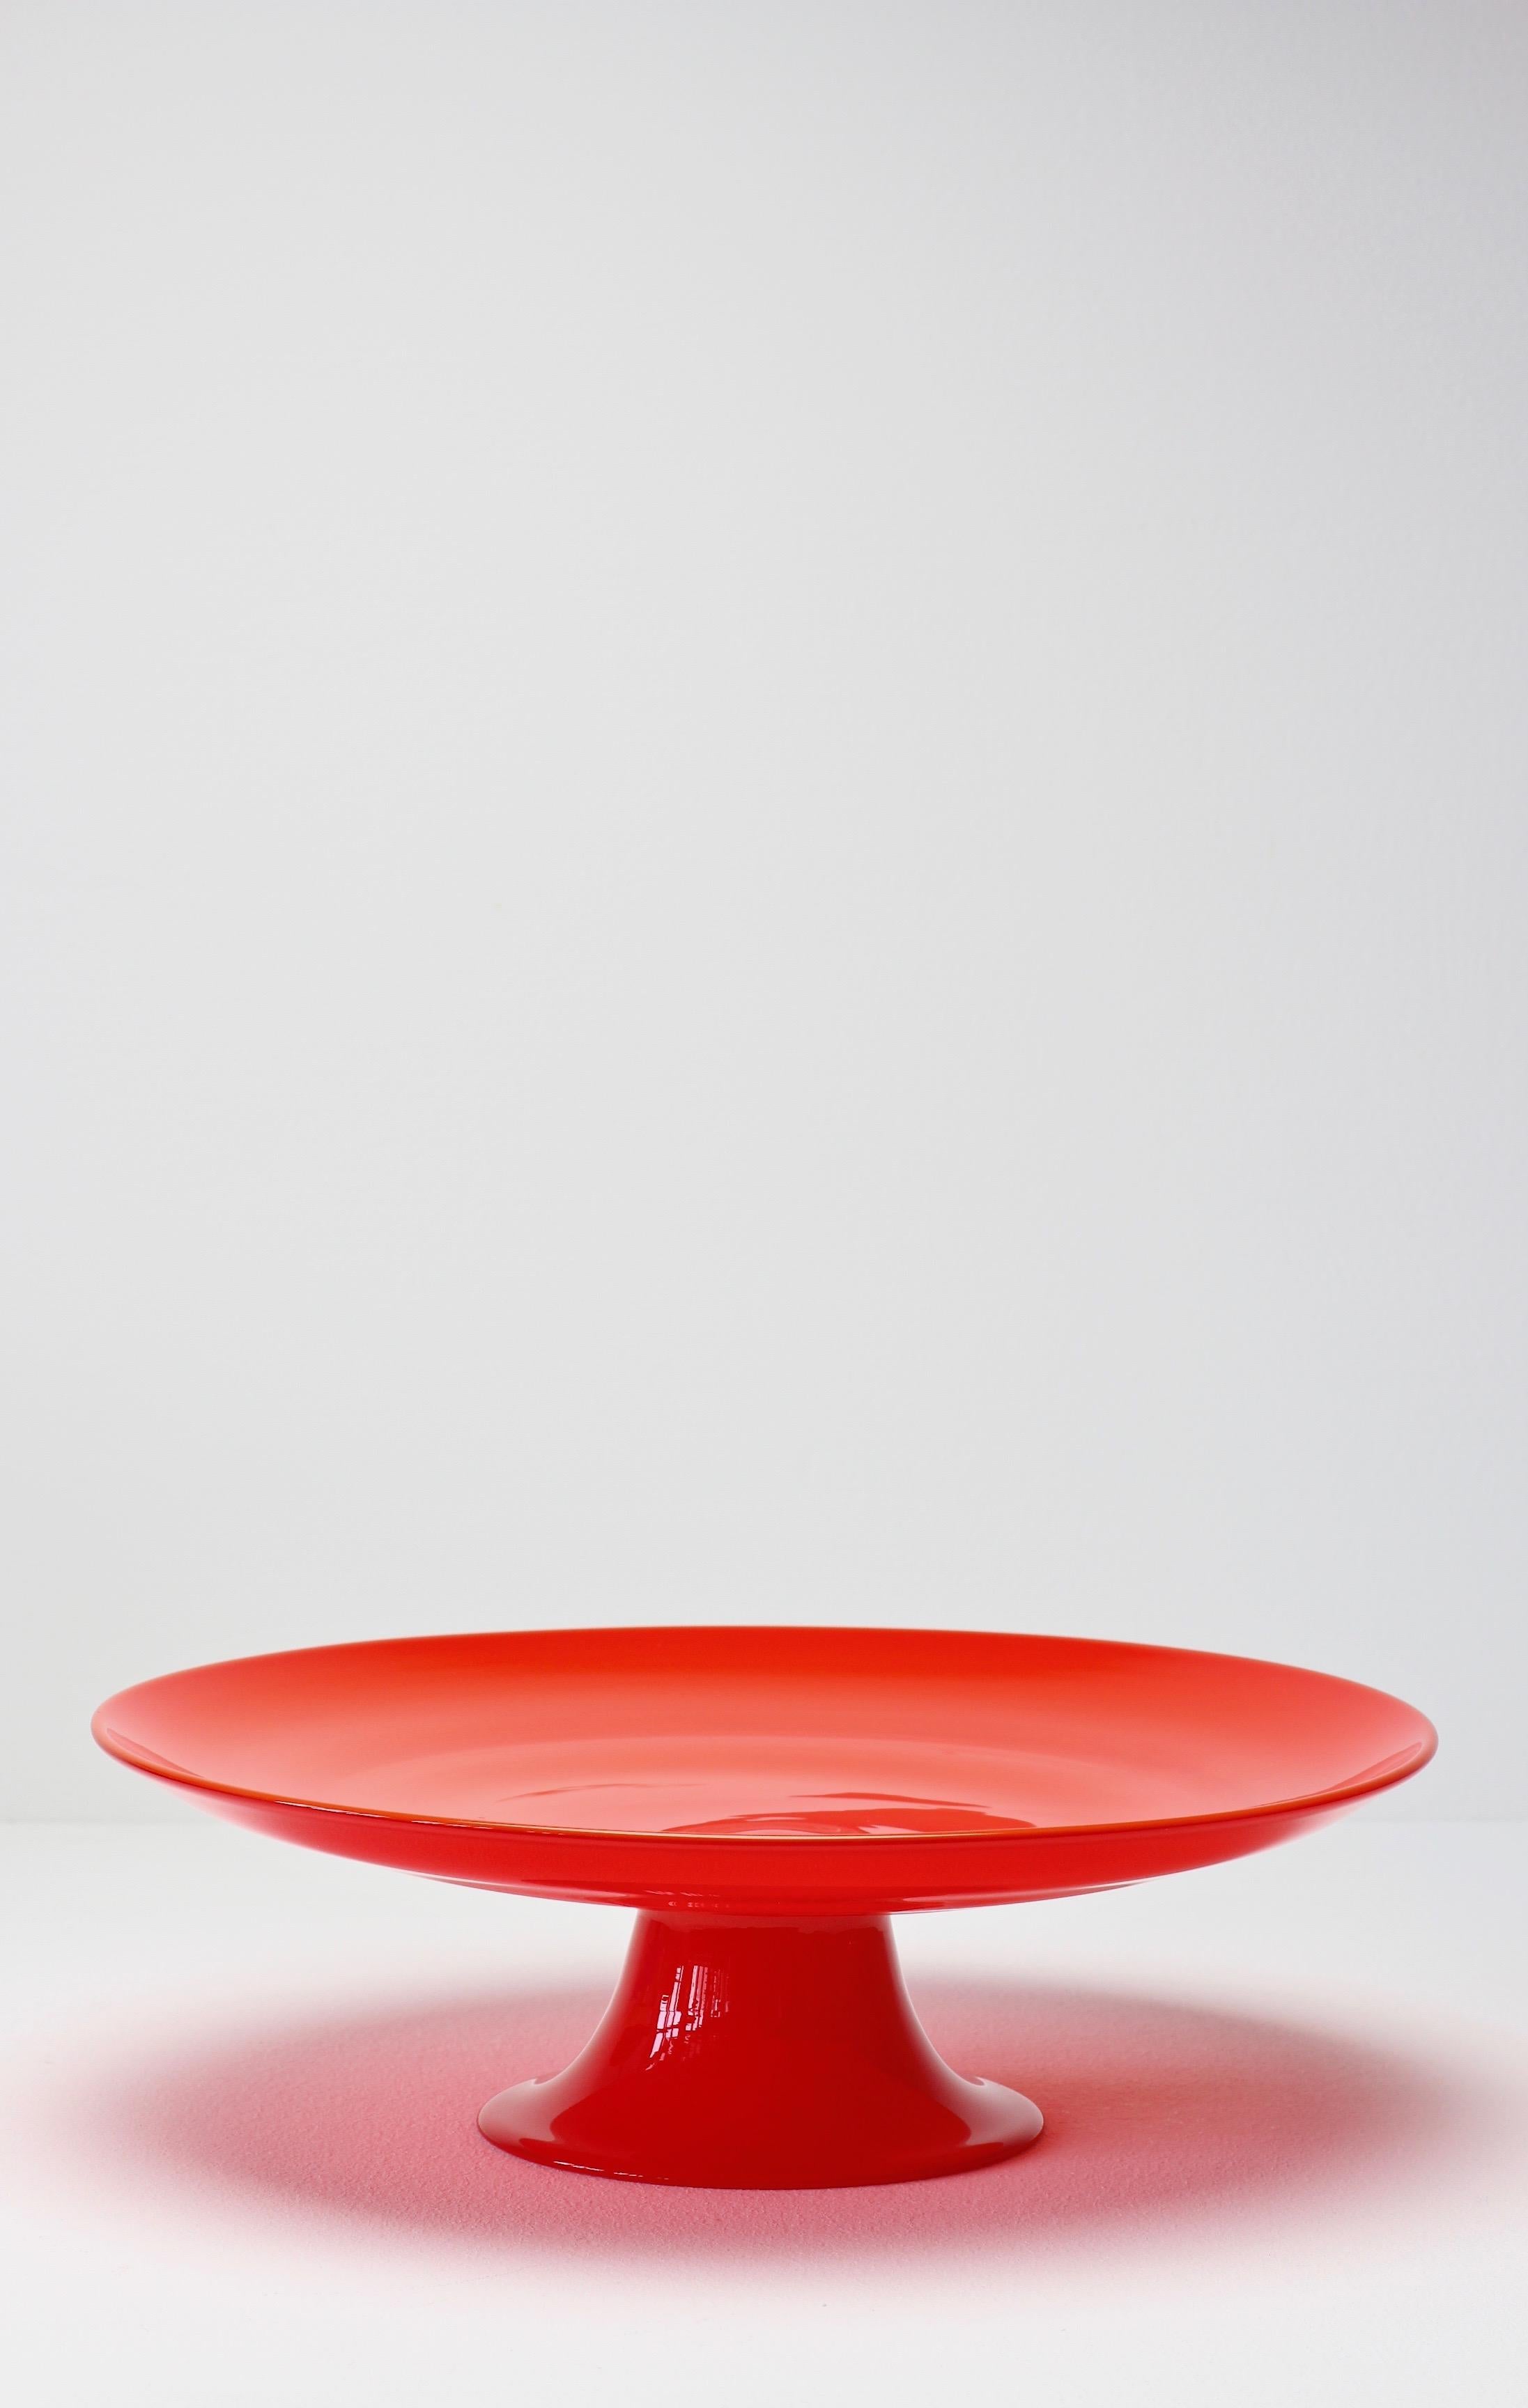 Glass cake stand or serving plate by Cenedese. Wonderful color/colour of bright red and simplistic yet elegant form.. Fun to dine with vibrant vintage Mid-Century Murano glass serveware.

Sold here as an individual dish.